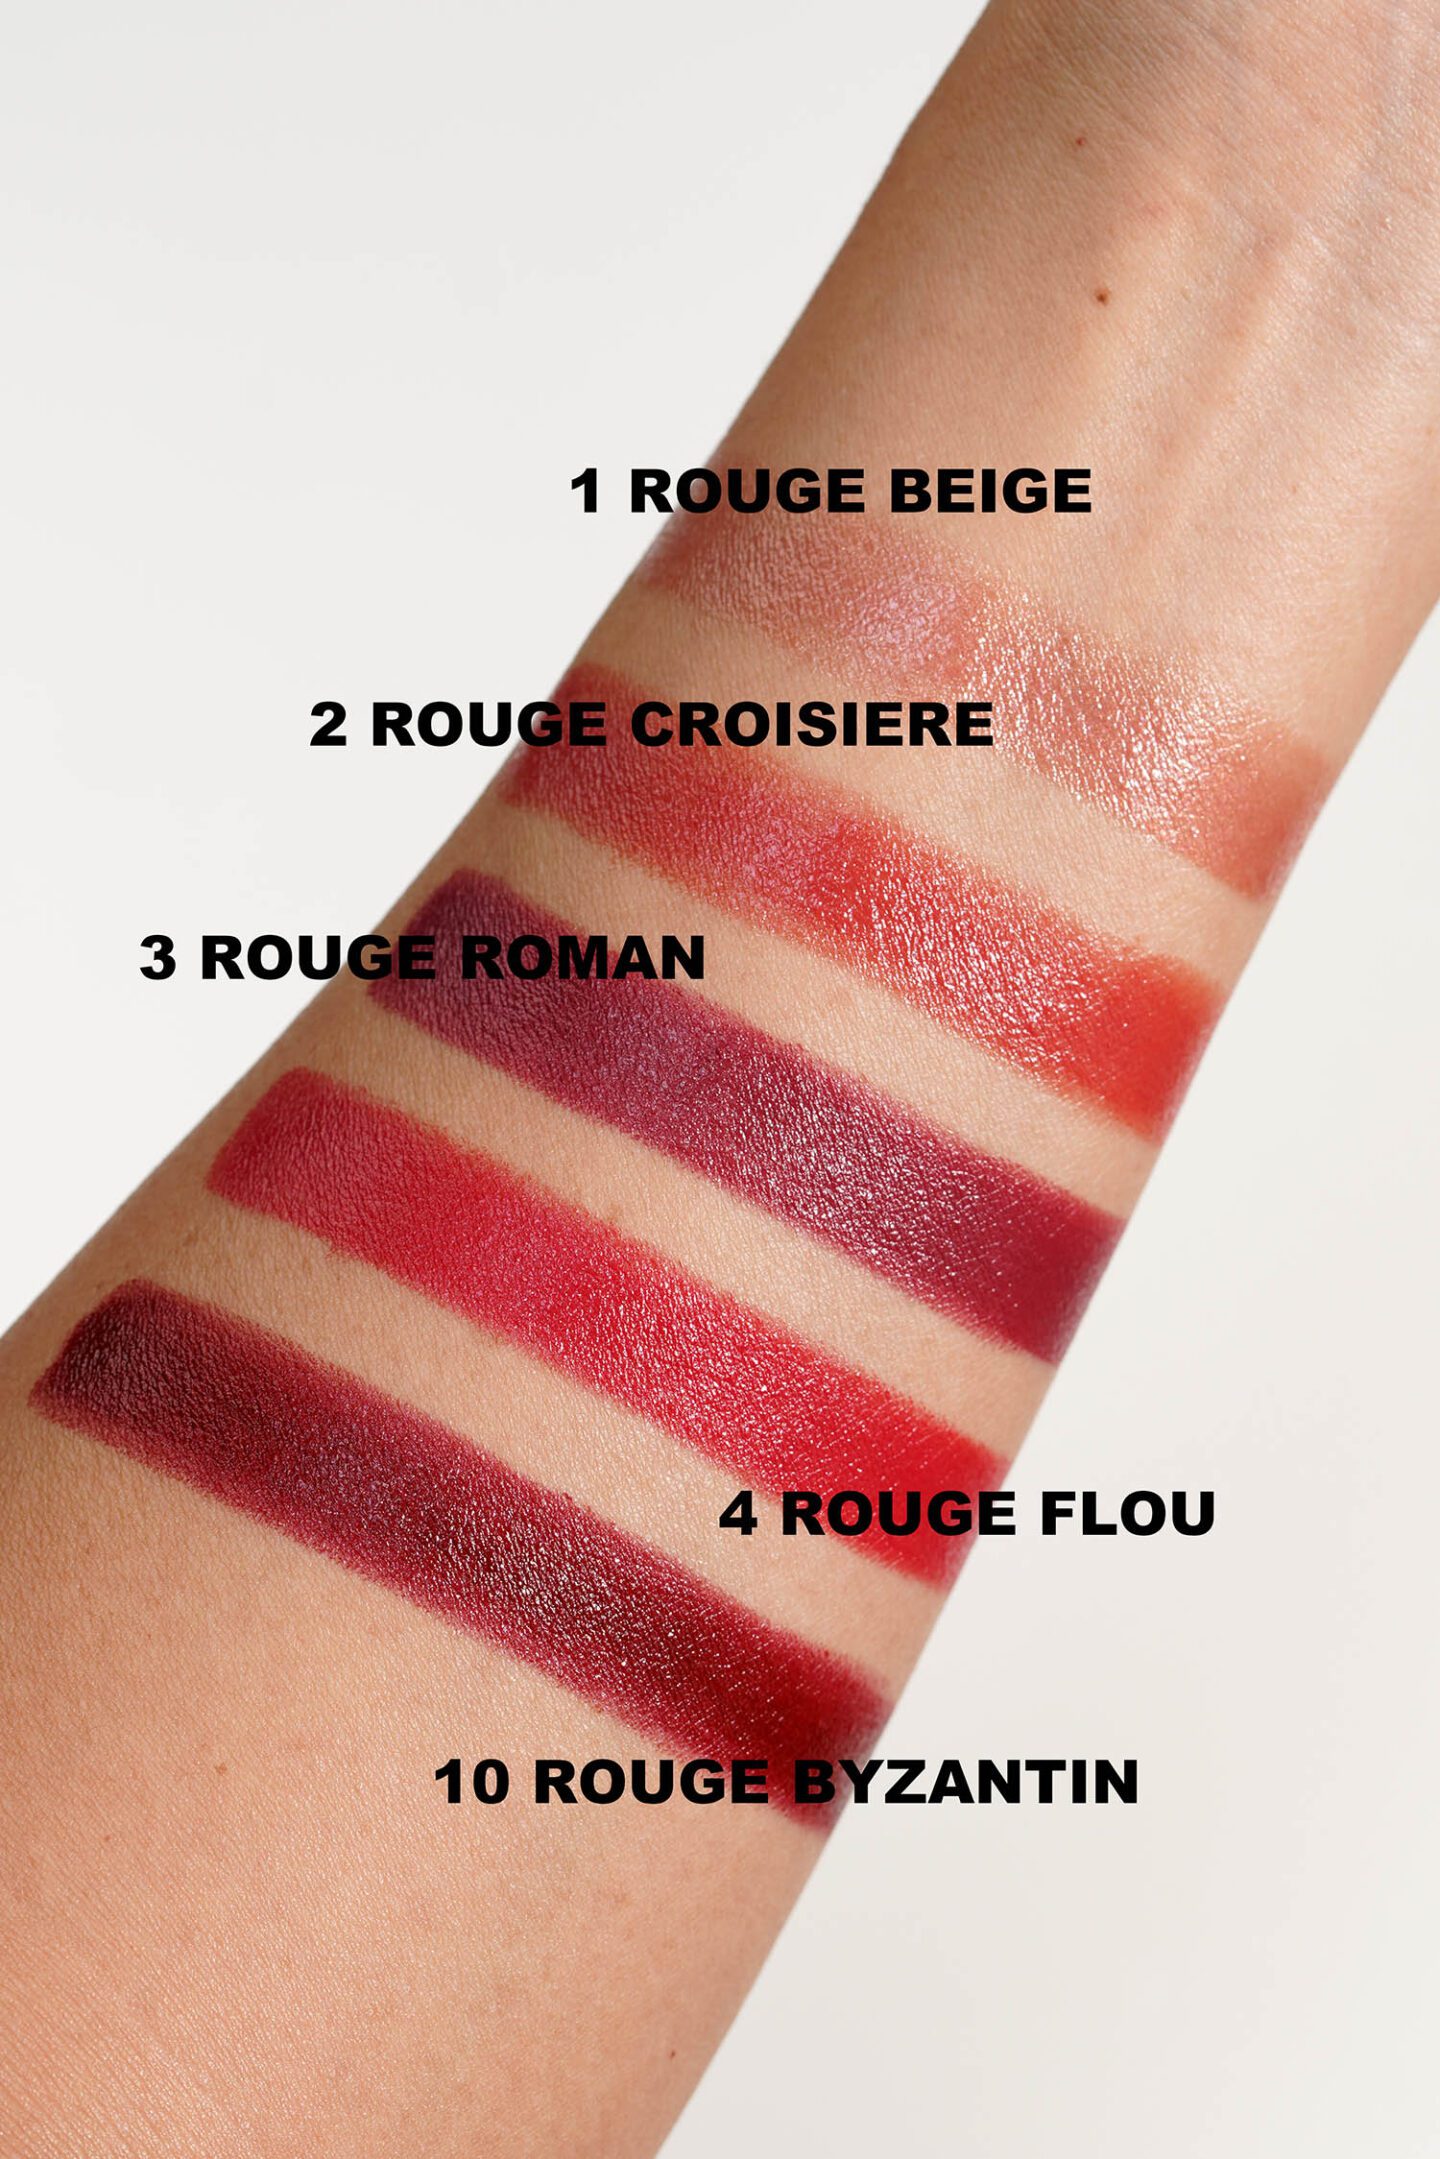 Chanel 31 Le Rouge Satin Lipstick swatches